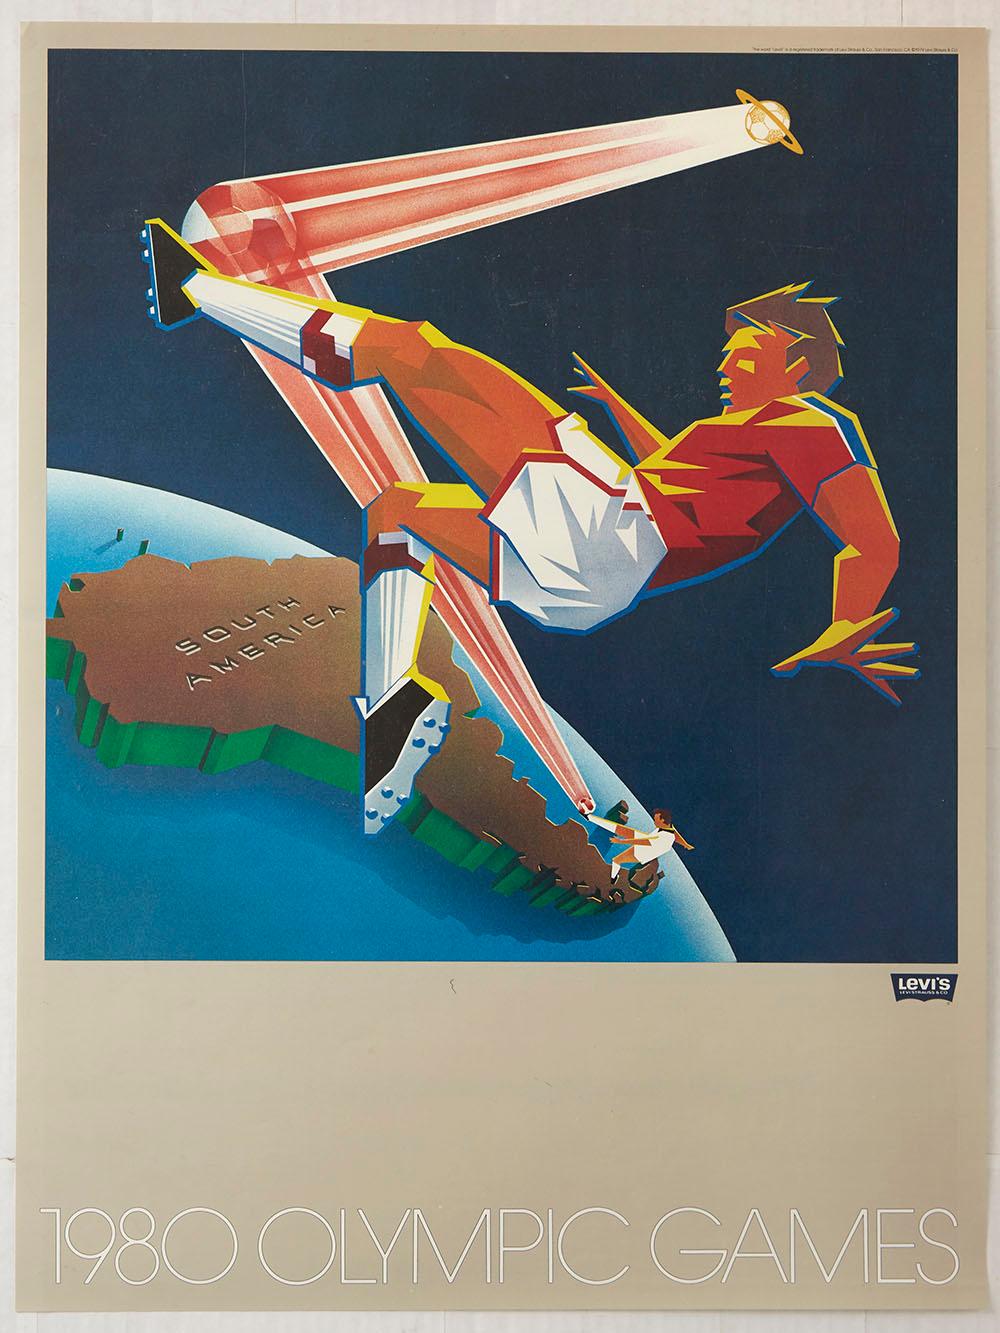 Set Of 6 Original Vintage Posters 1980 Moscow Olympic Games Levi's Sport Design 6